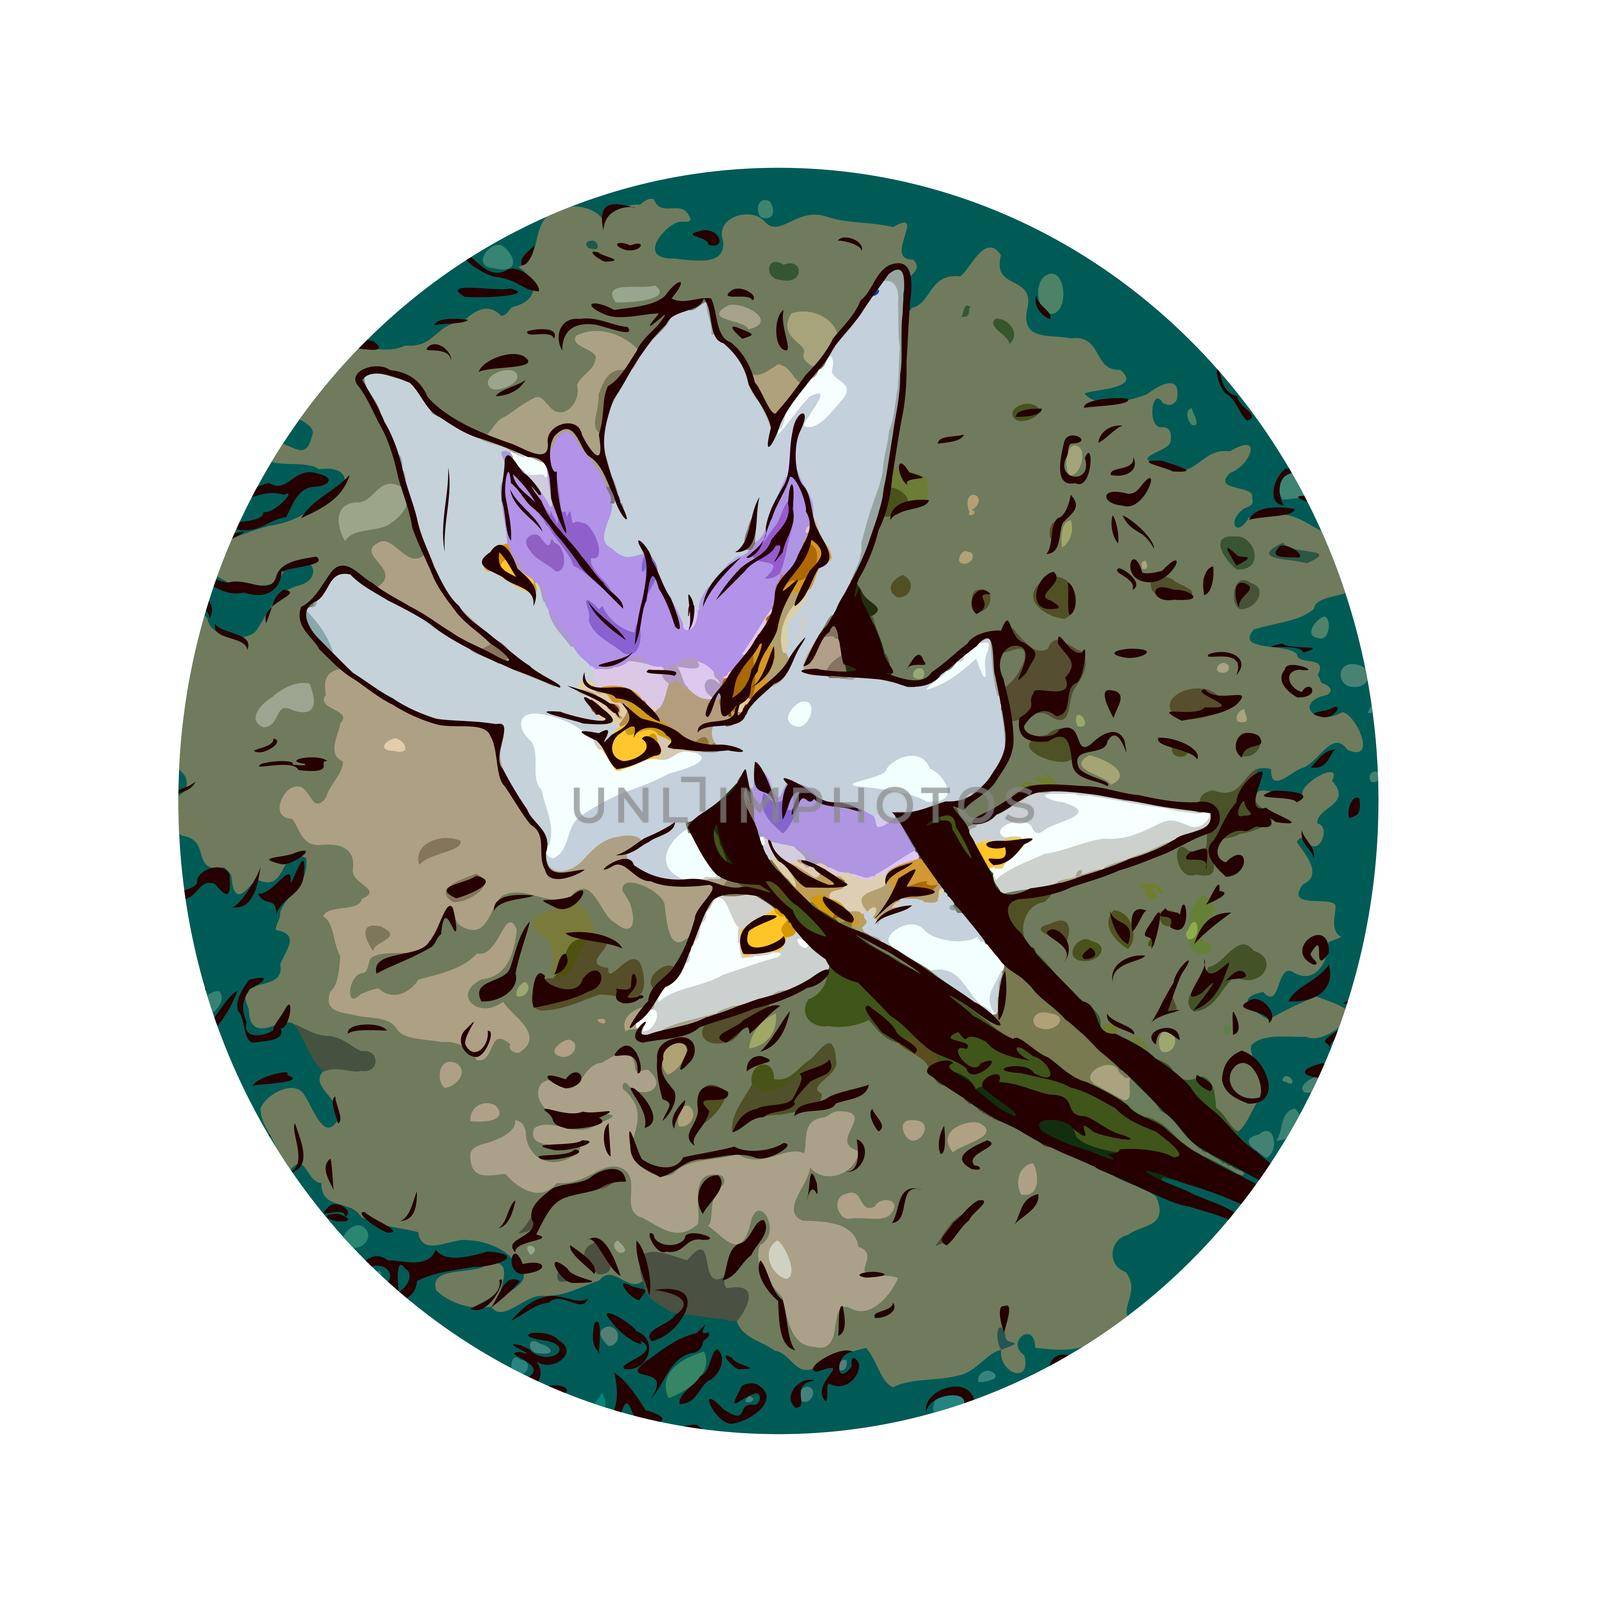 WPA poster art of an iris flower set inside circle  done in works project administration or federal art project style.